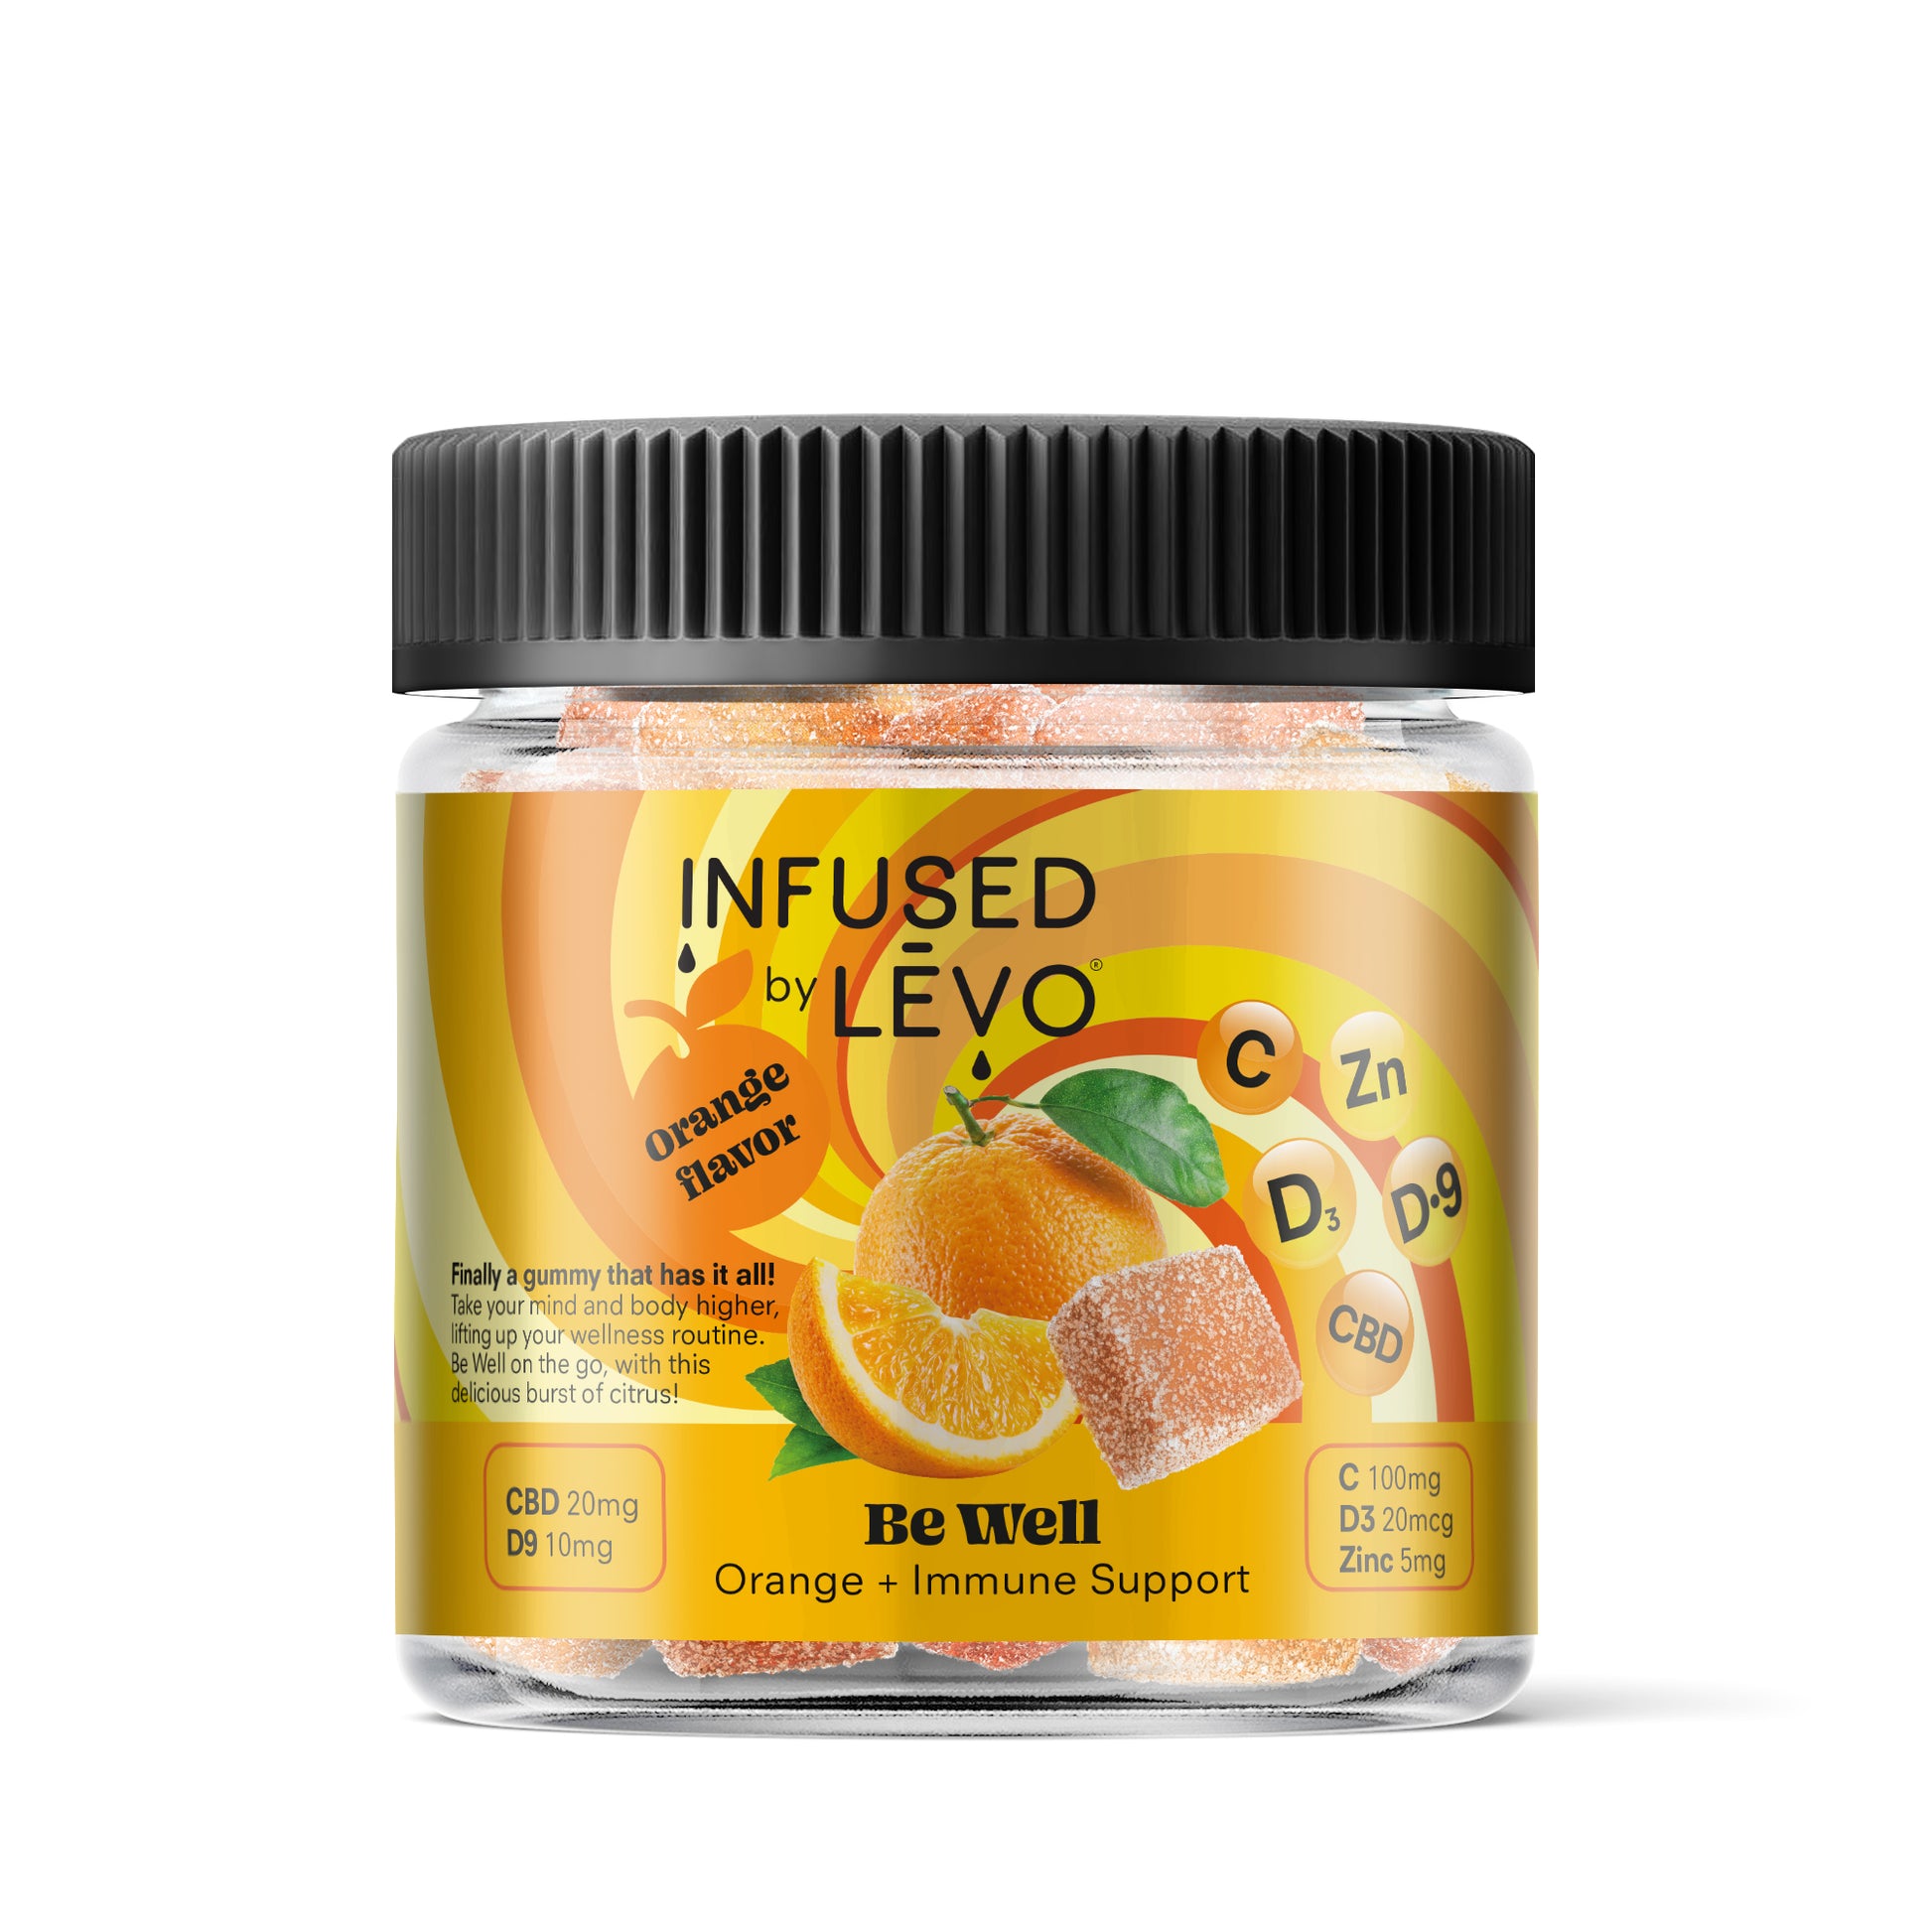 Infused by LEVO Be Well Gummies orange flavored with immunity support. Bottle of gummies.